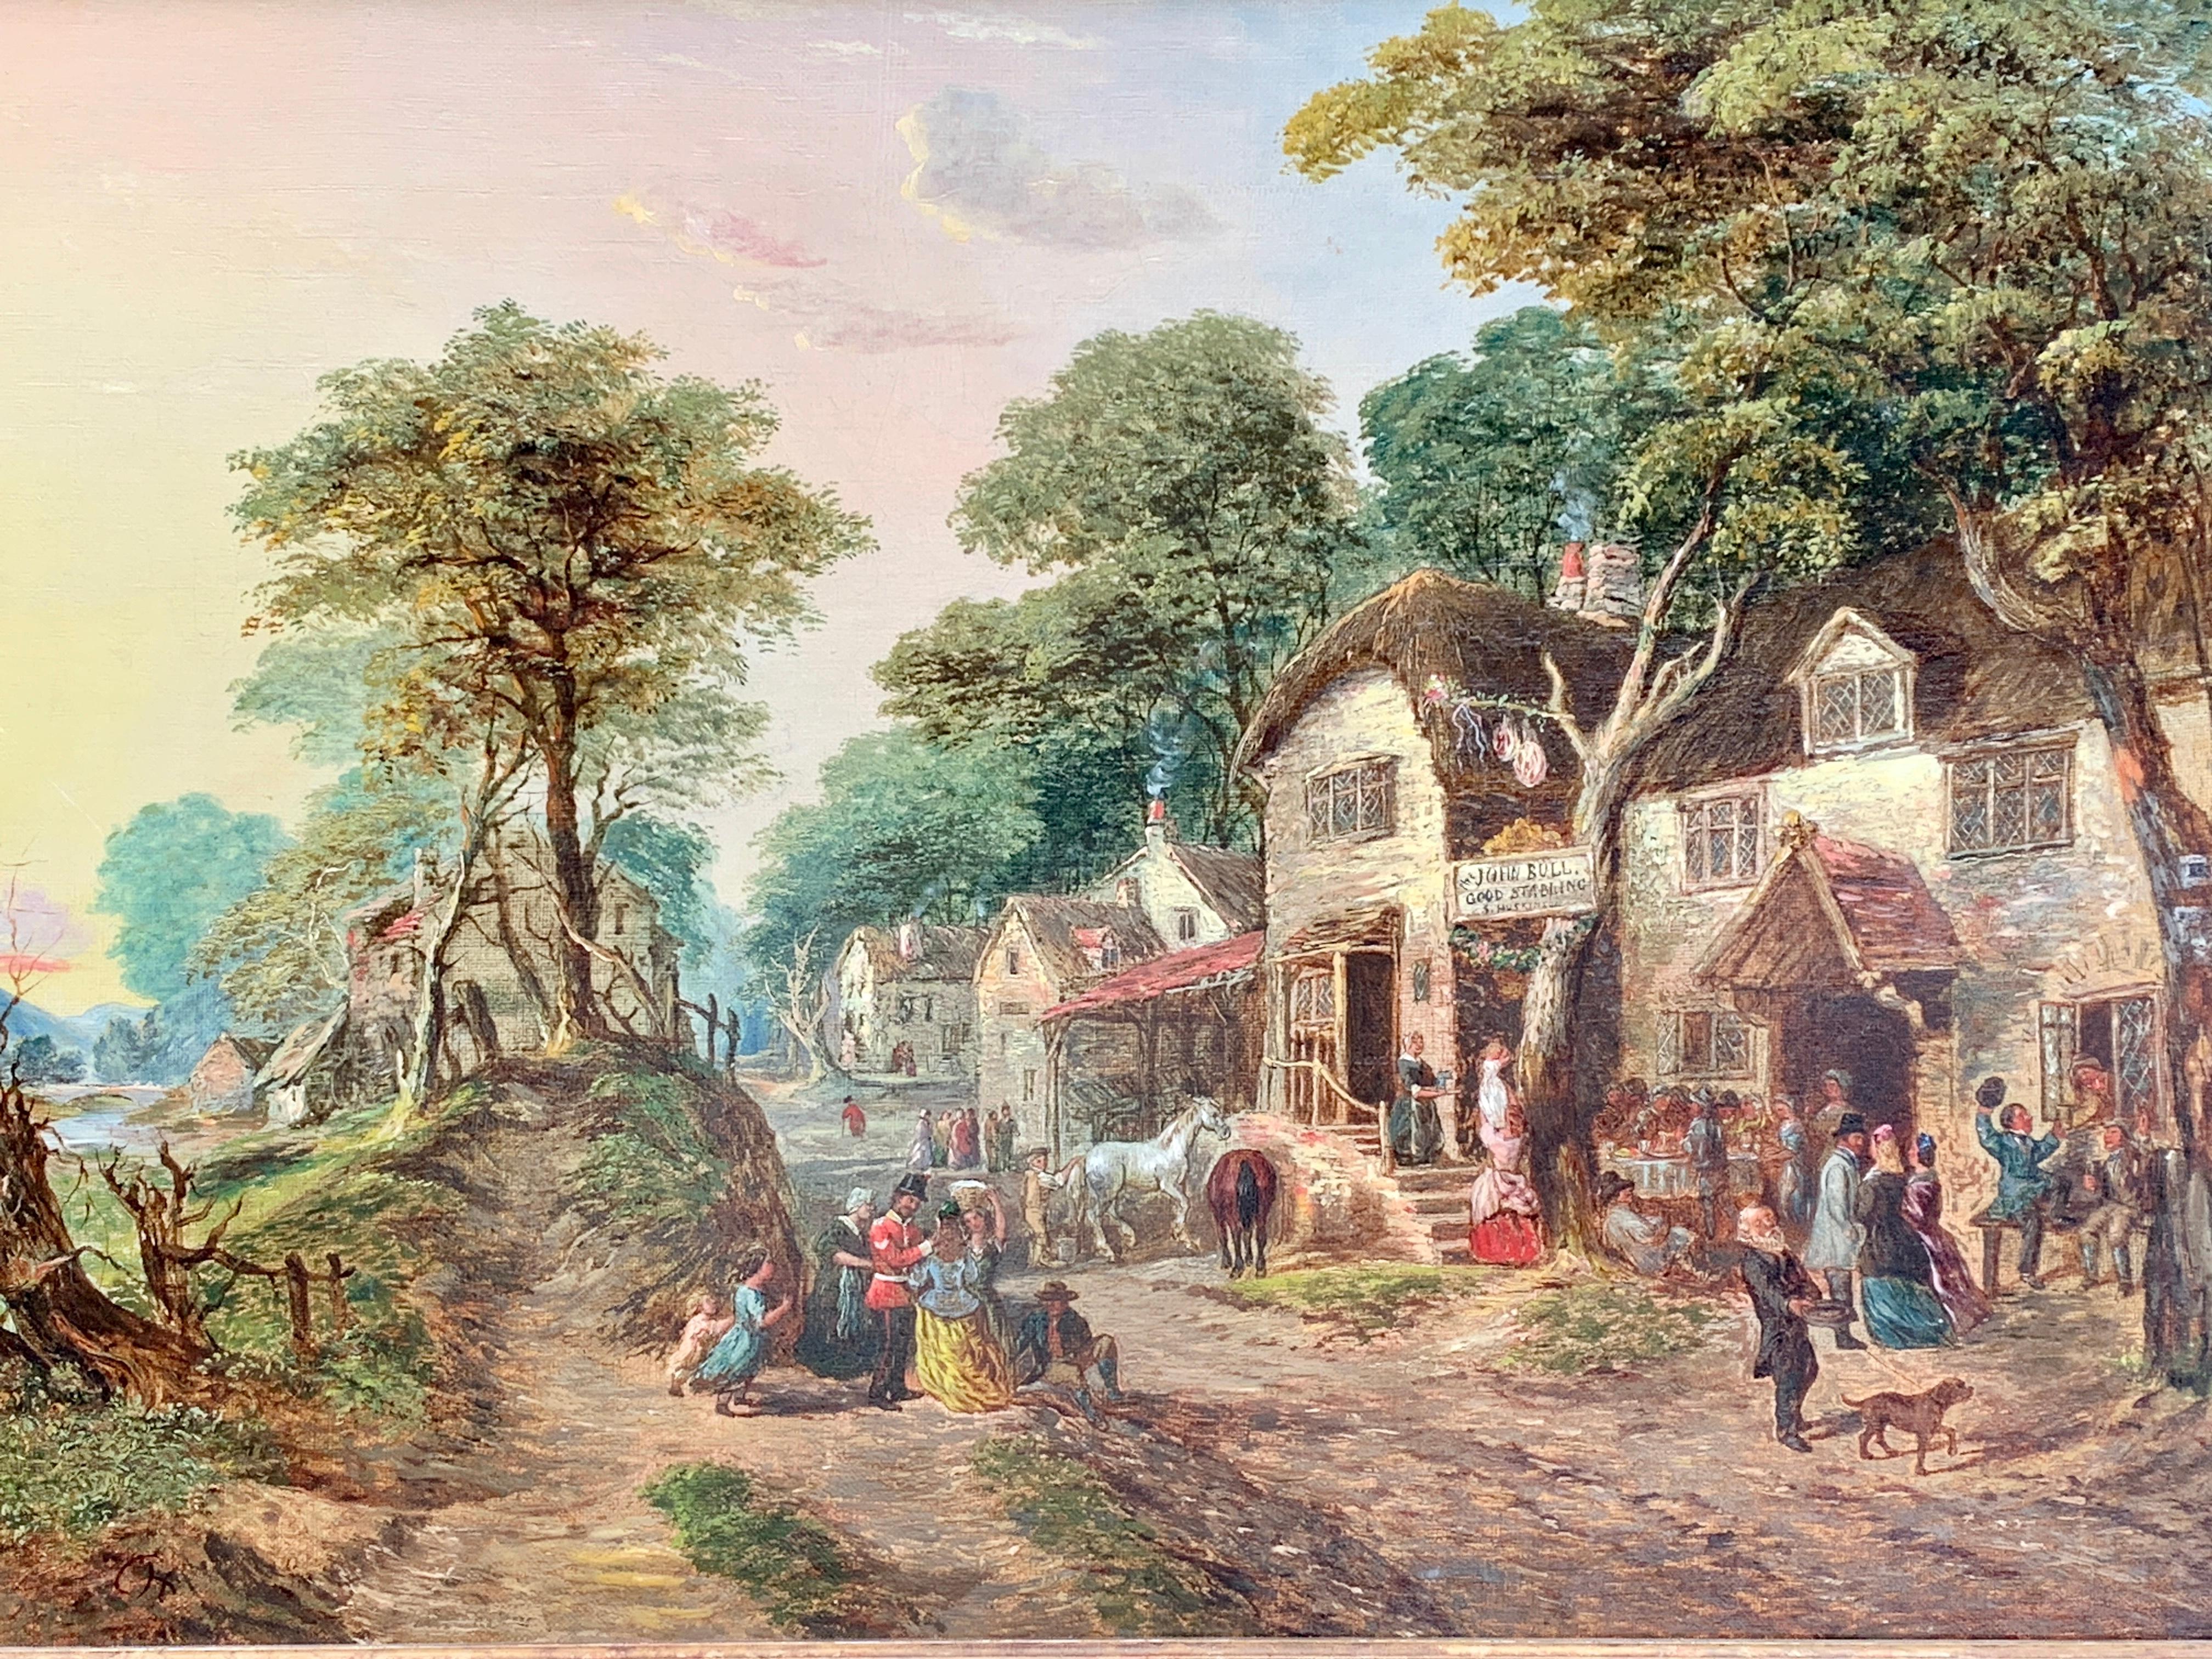  Antique Oil of an English Village landscape, with horses, people, a pub. - Painting by John Holland Senior